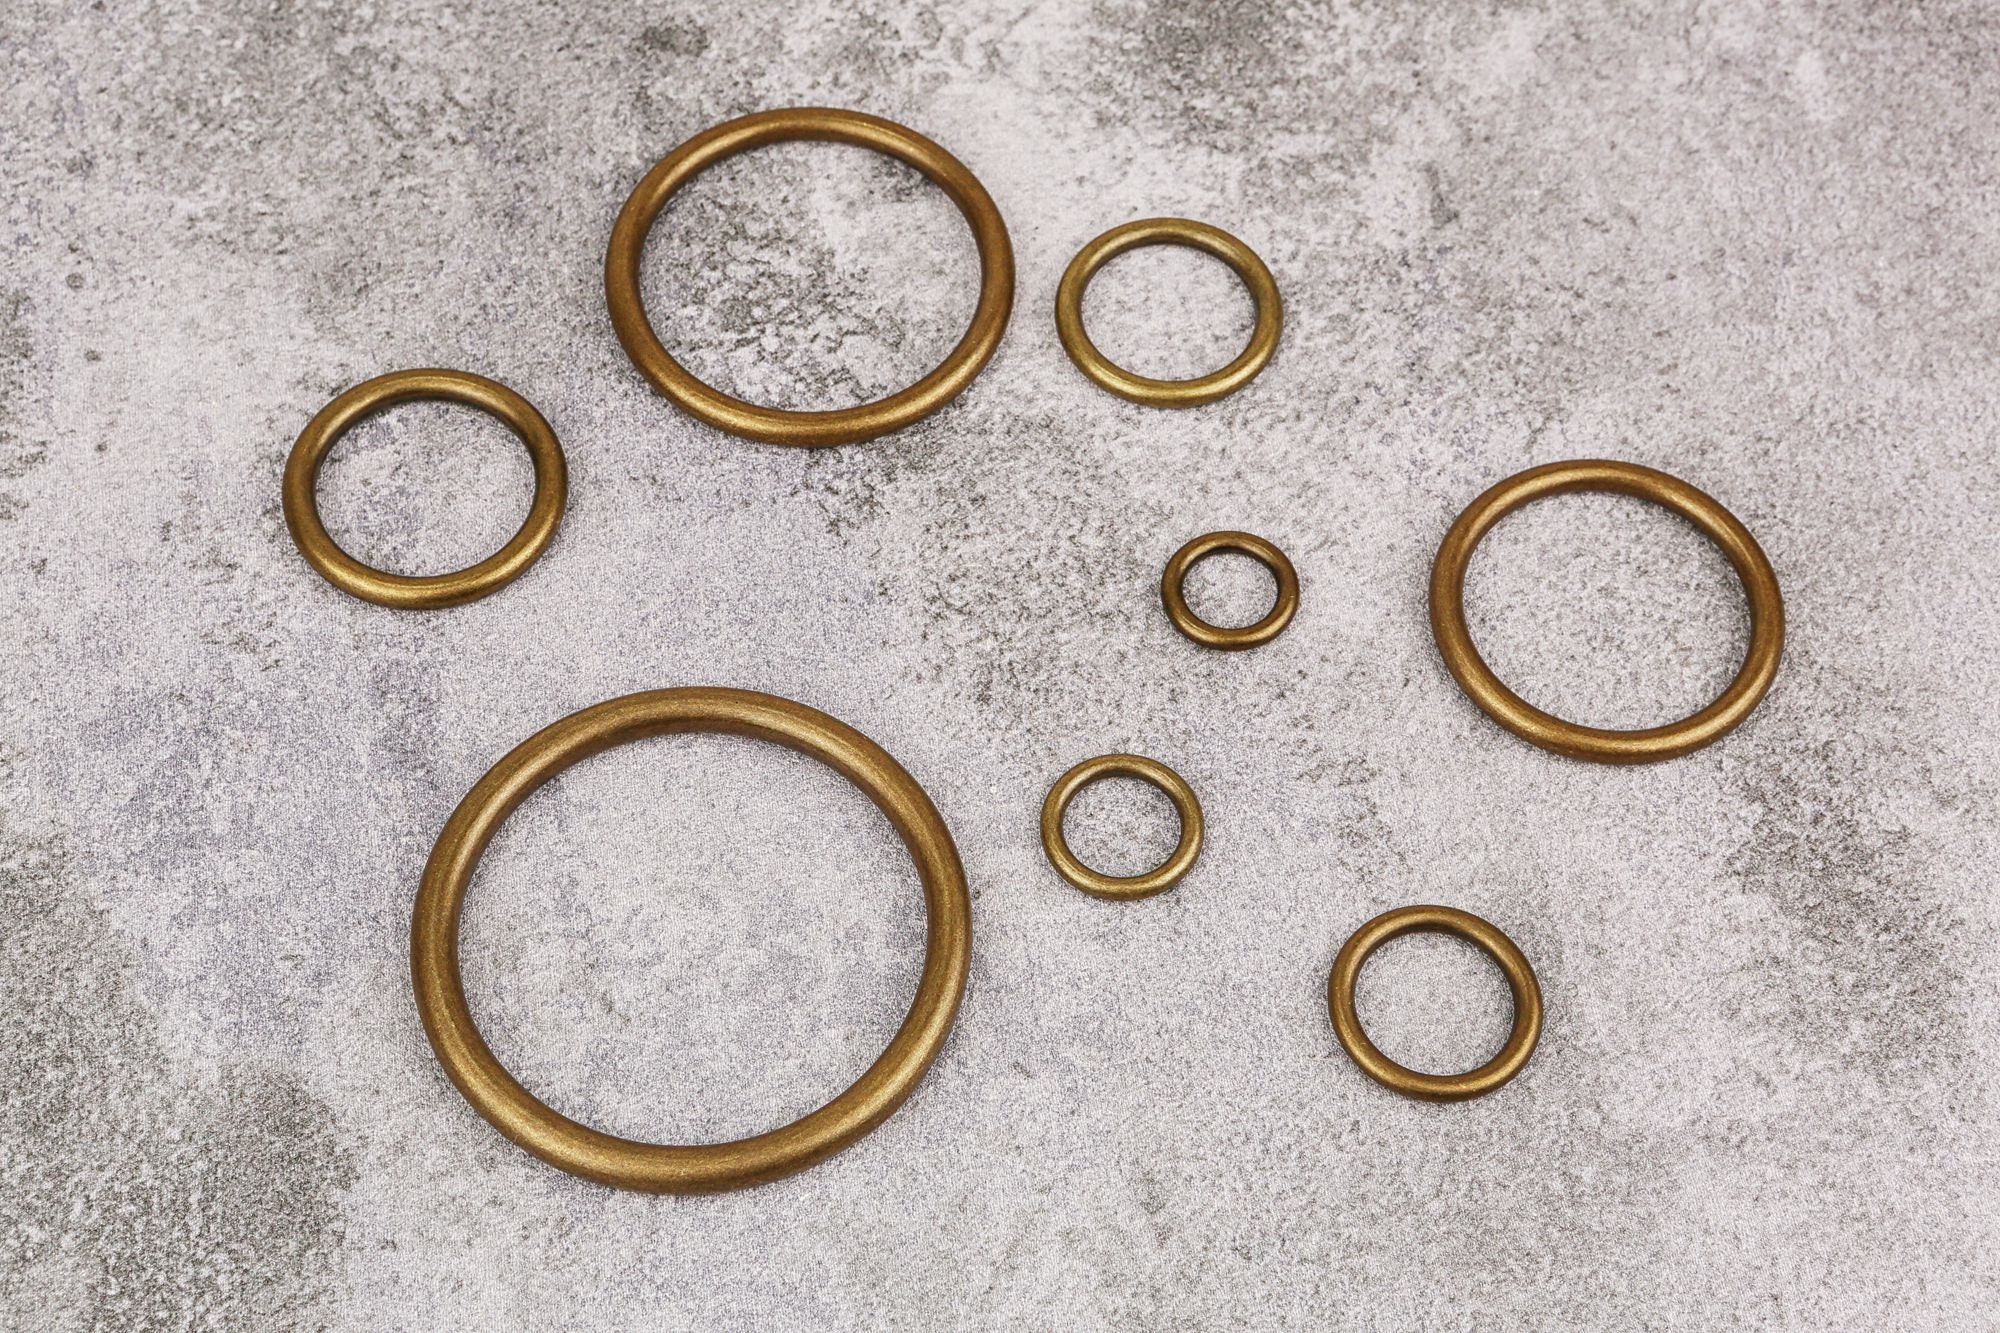 O-ring Findings Metal Non-welded O Rings for Belts Bags Lanyard